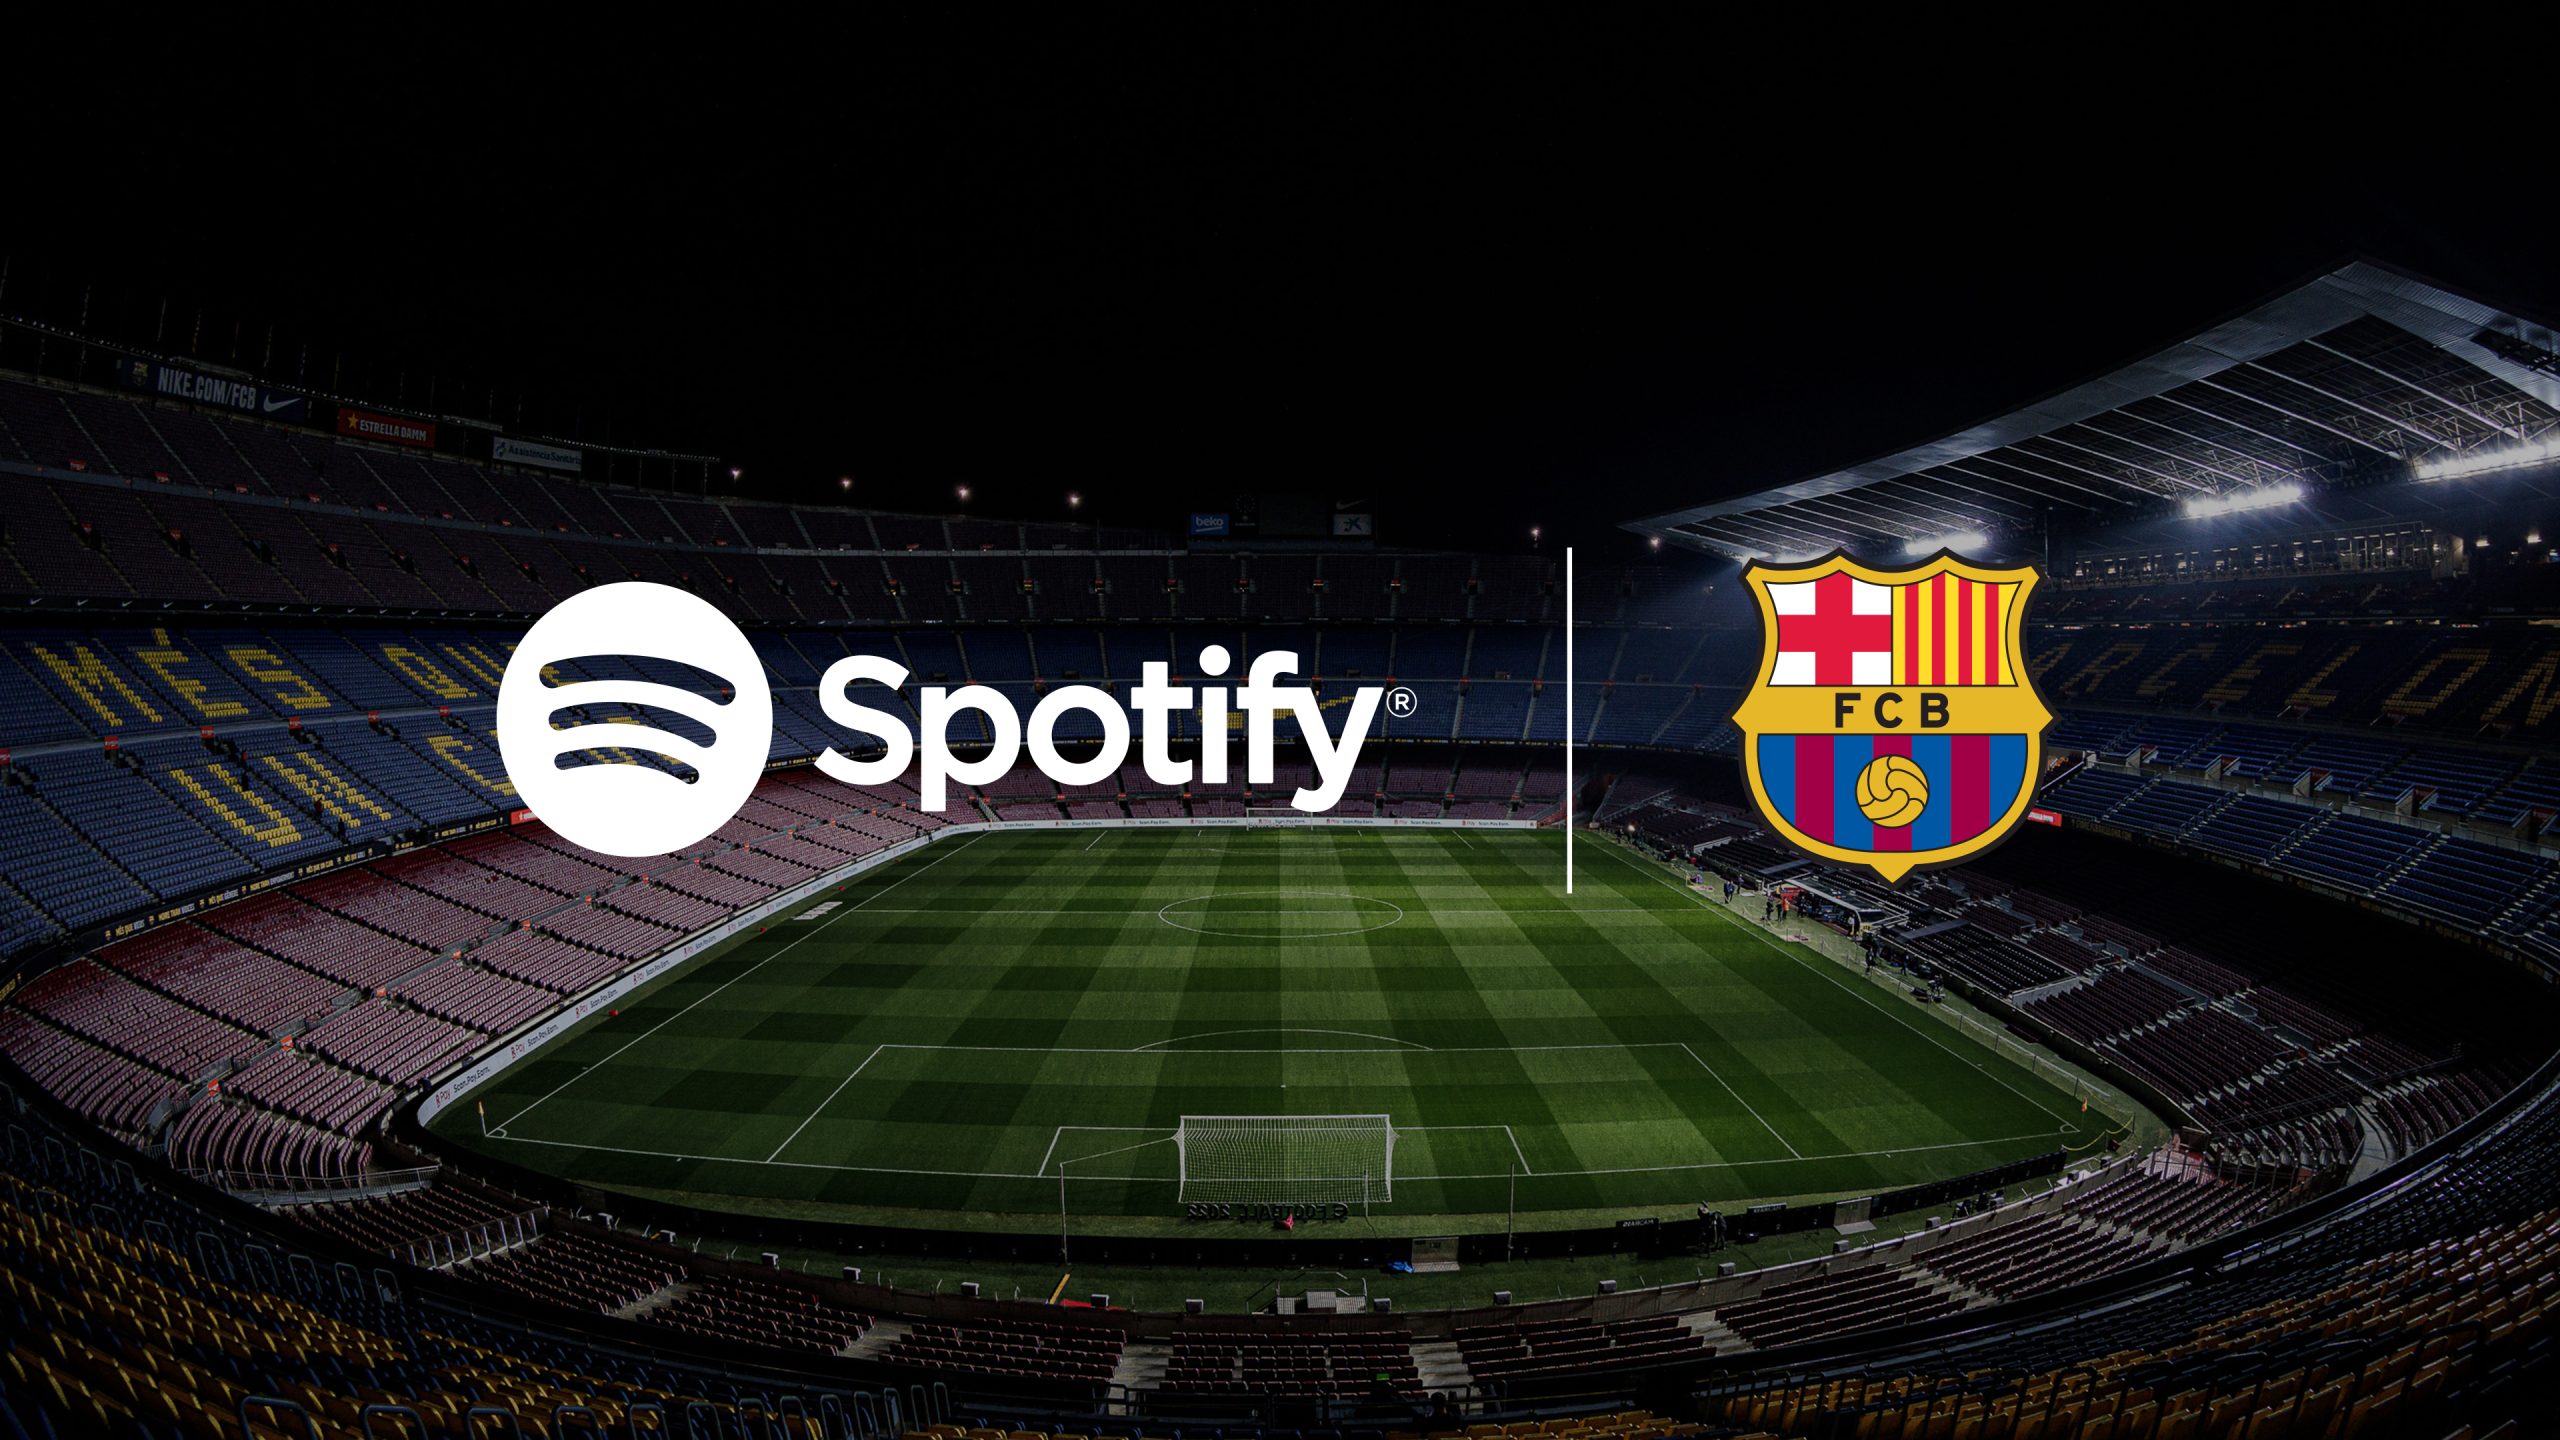 Swedish Spotify is becoming the main partner of Barça - ArcticStartup